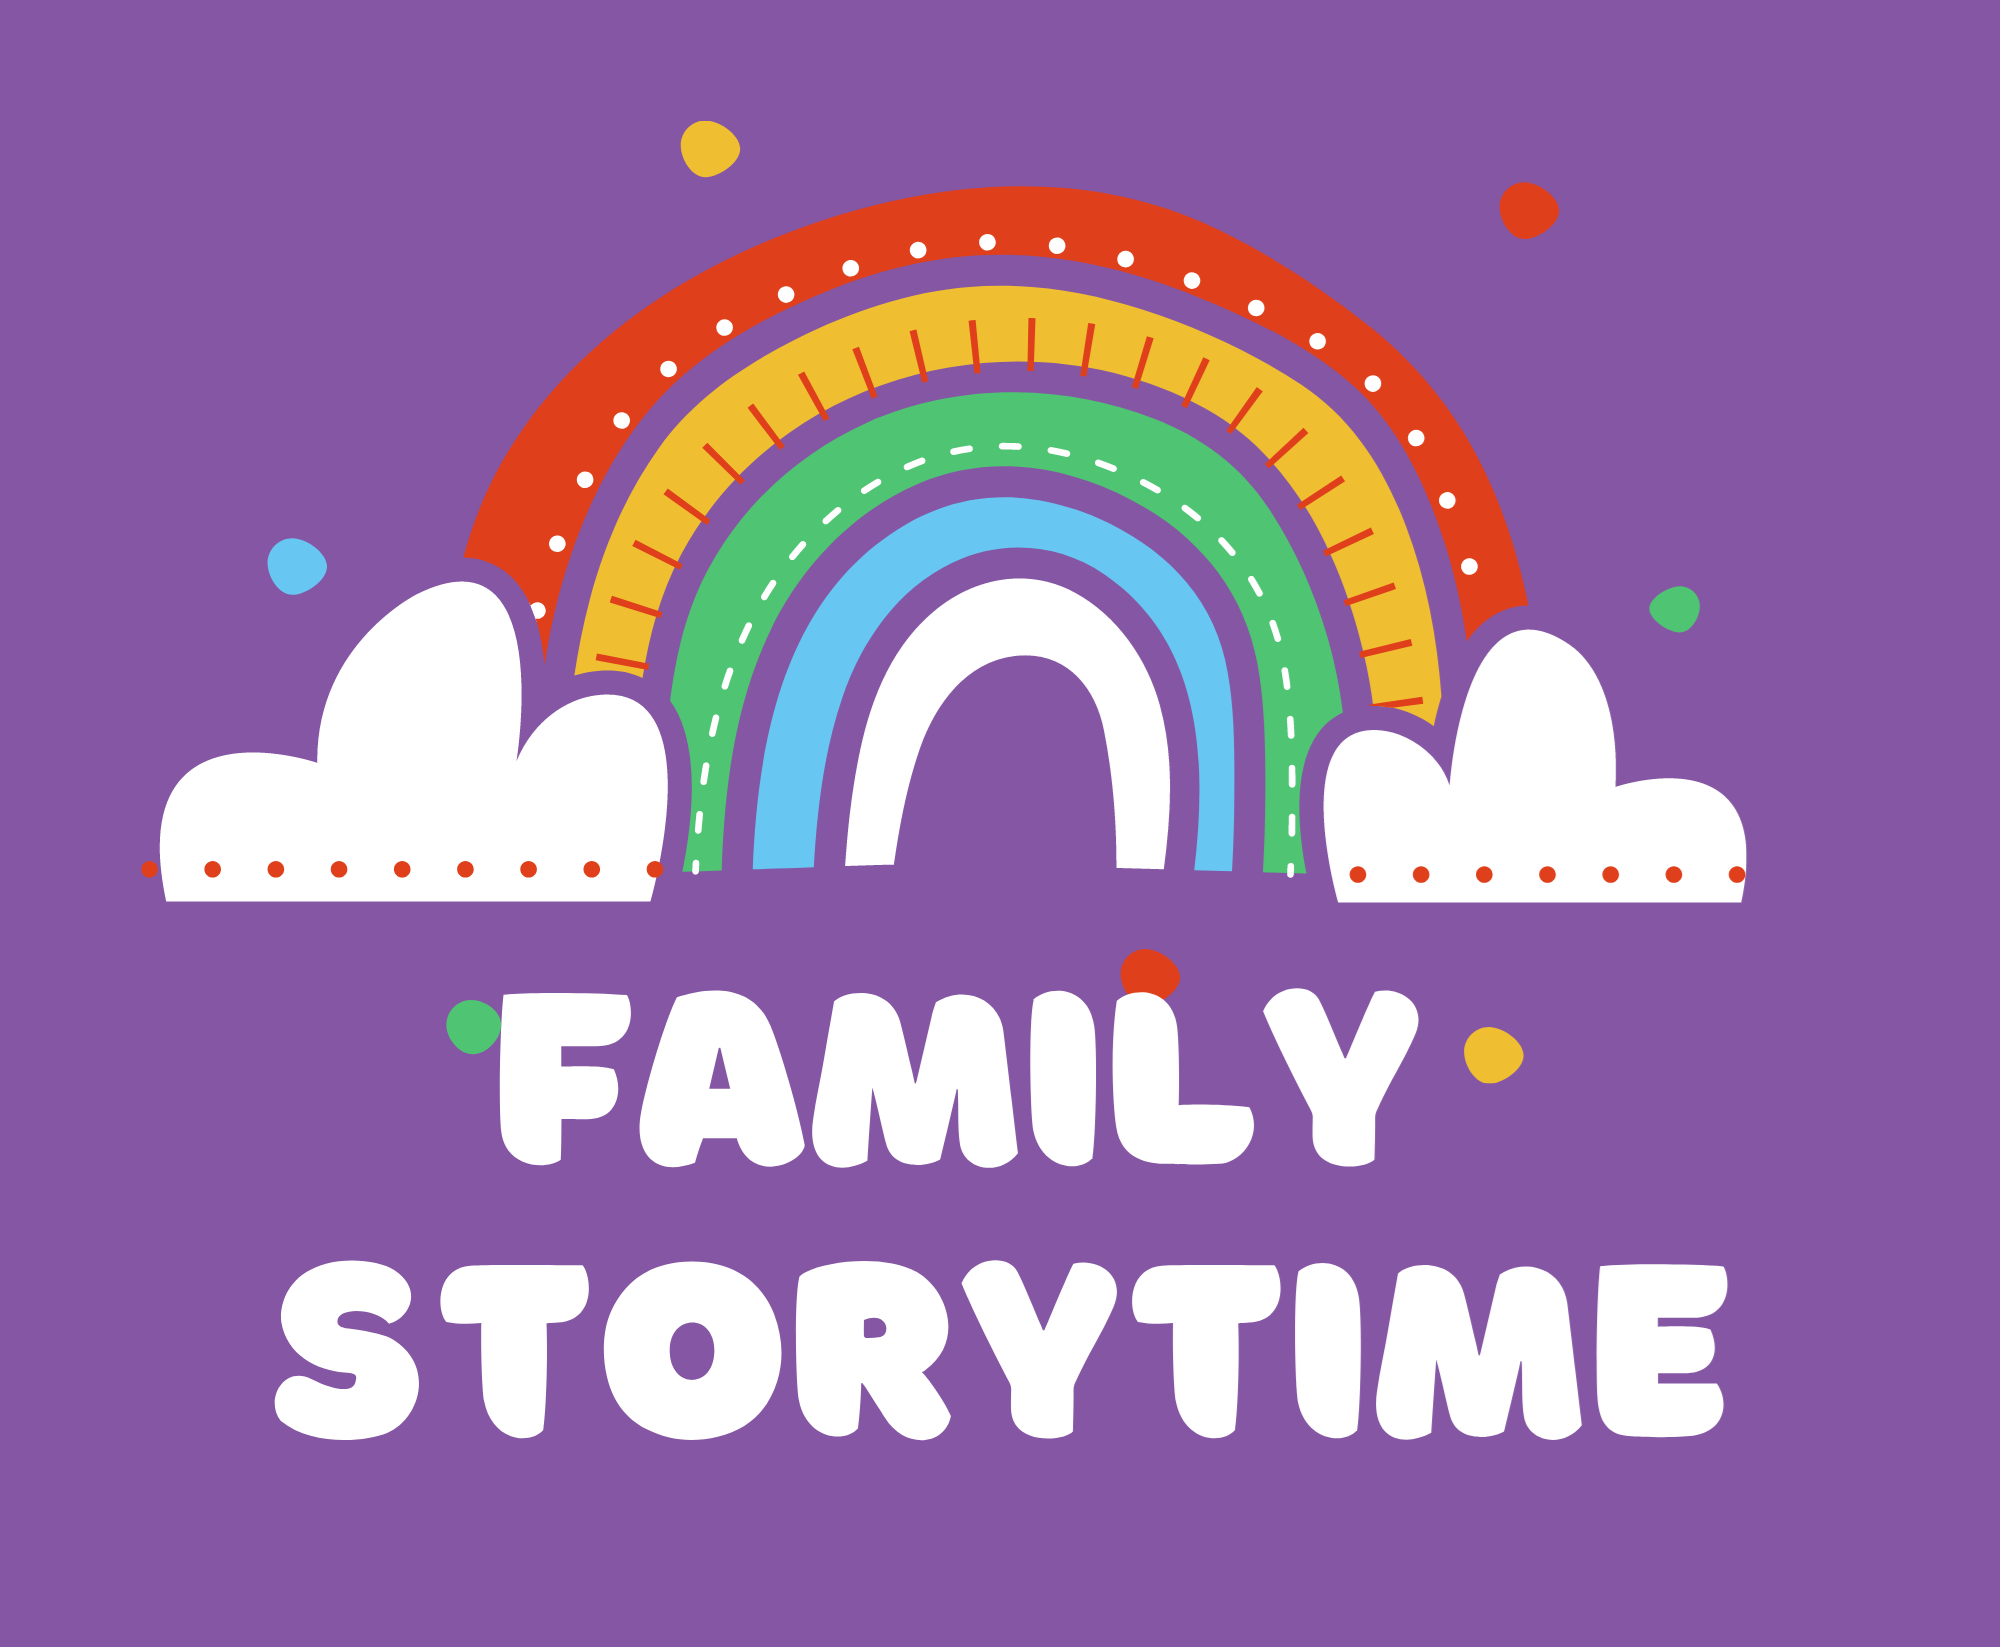 Image of rainbow and text reading "family storytime". 